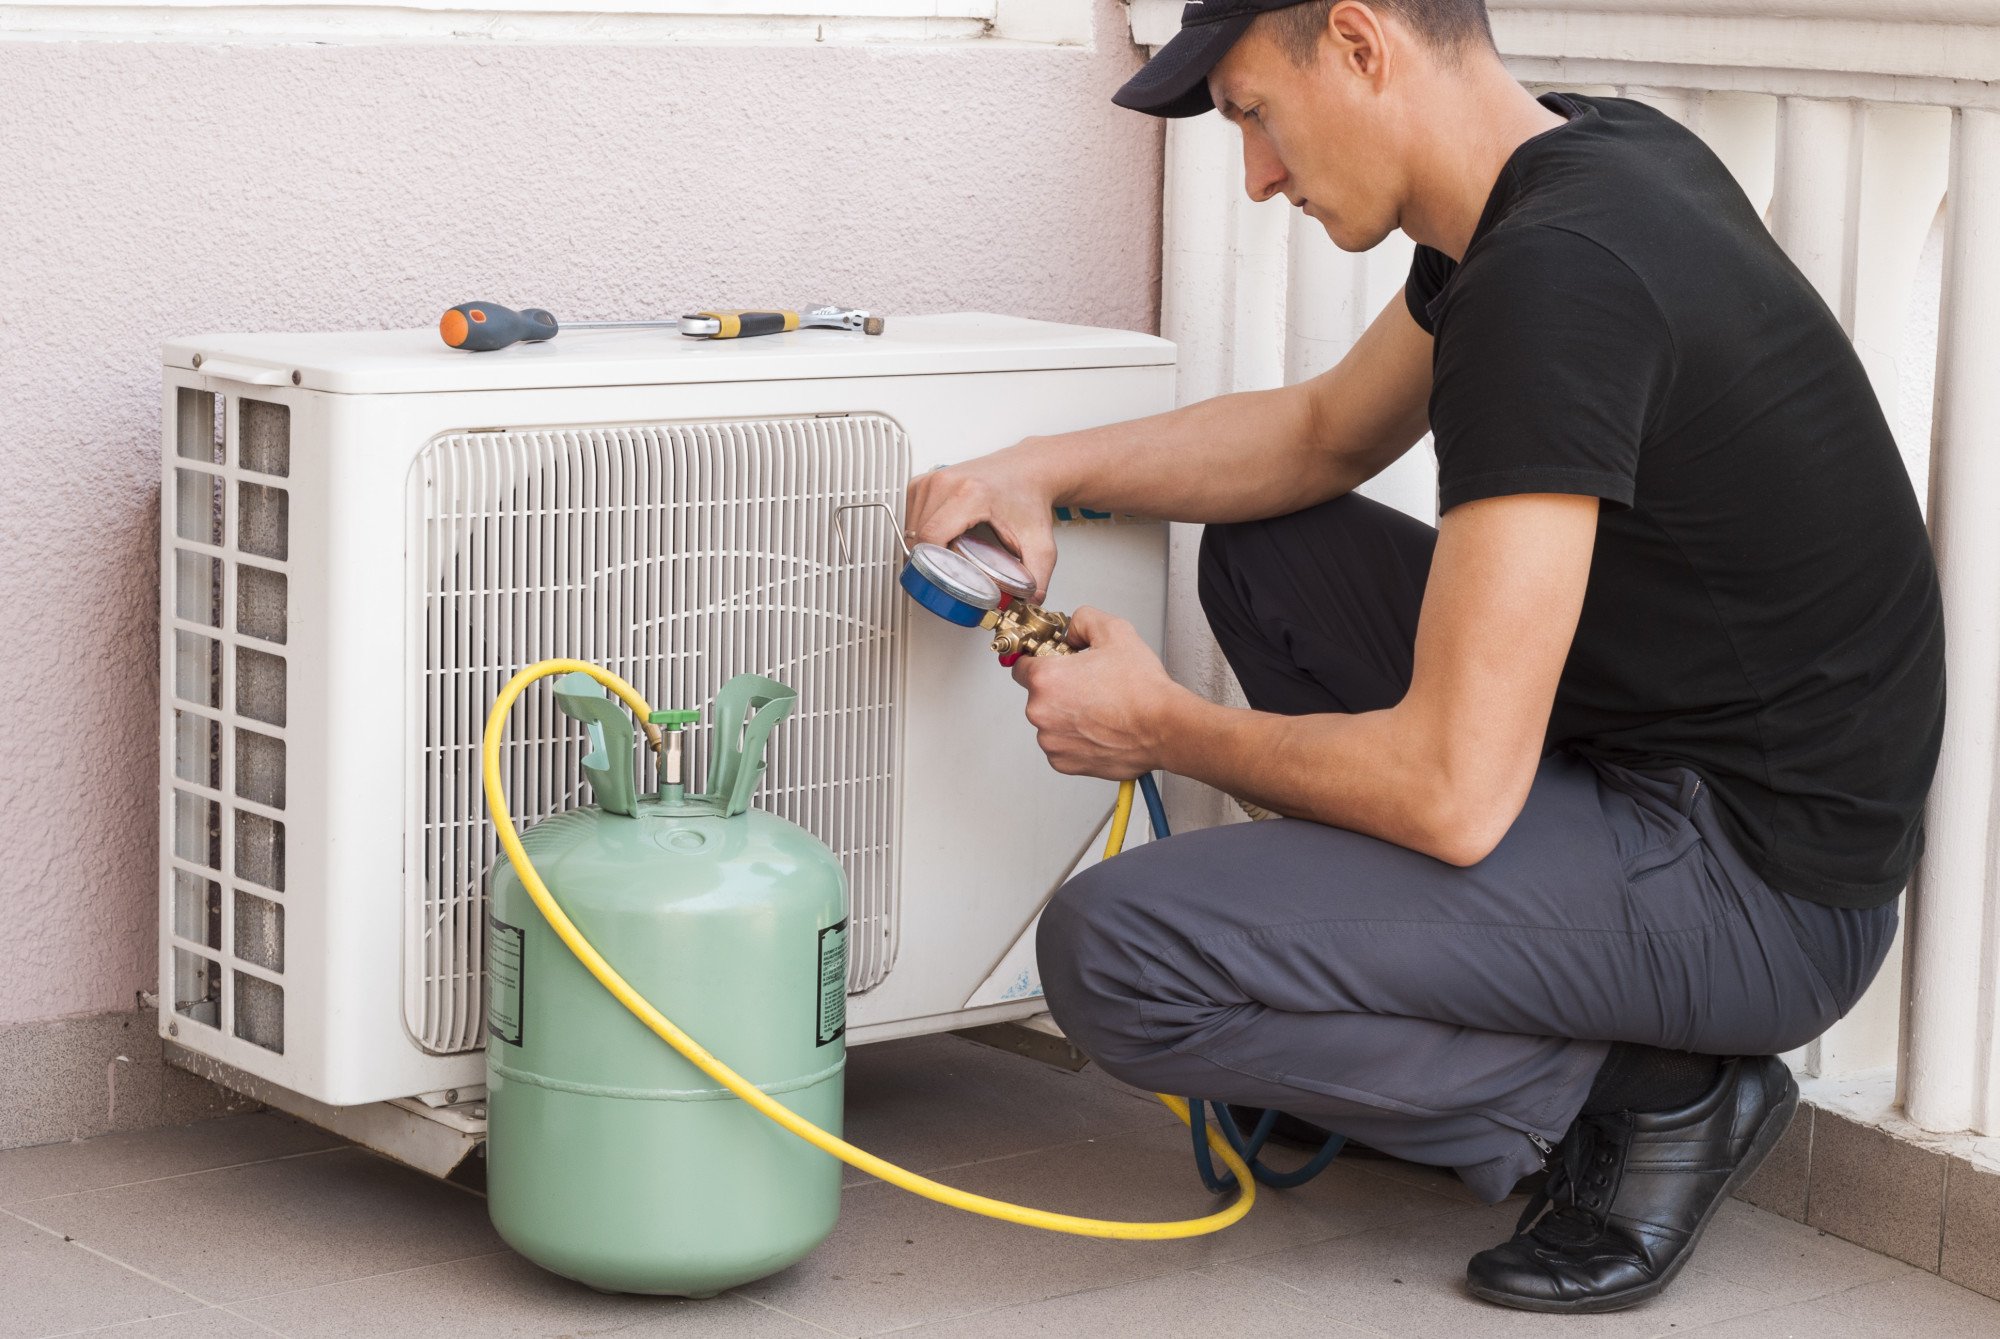 Unknown Facts About Air Conditioning